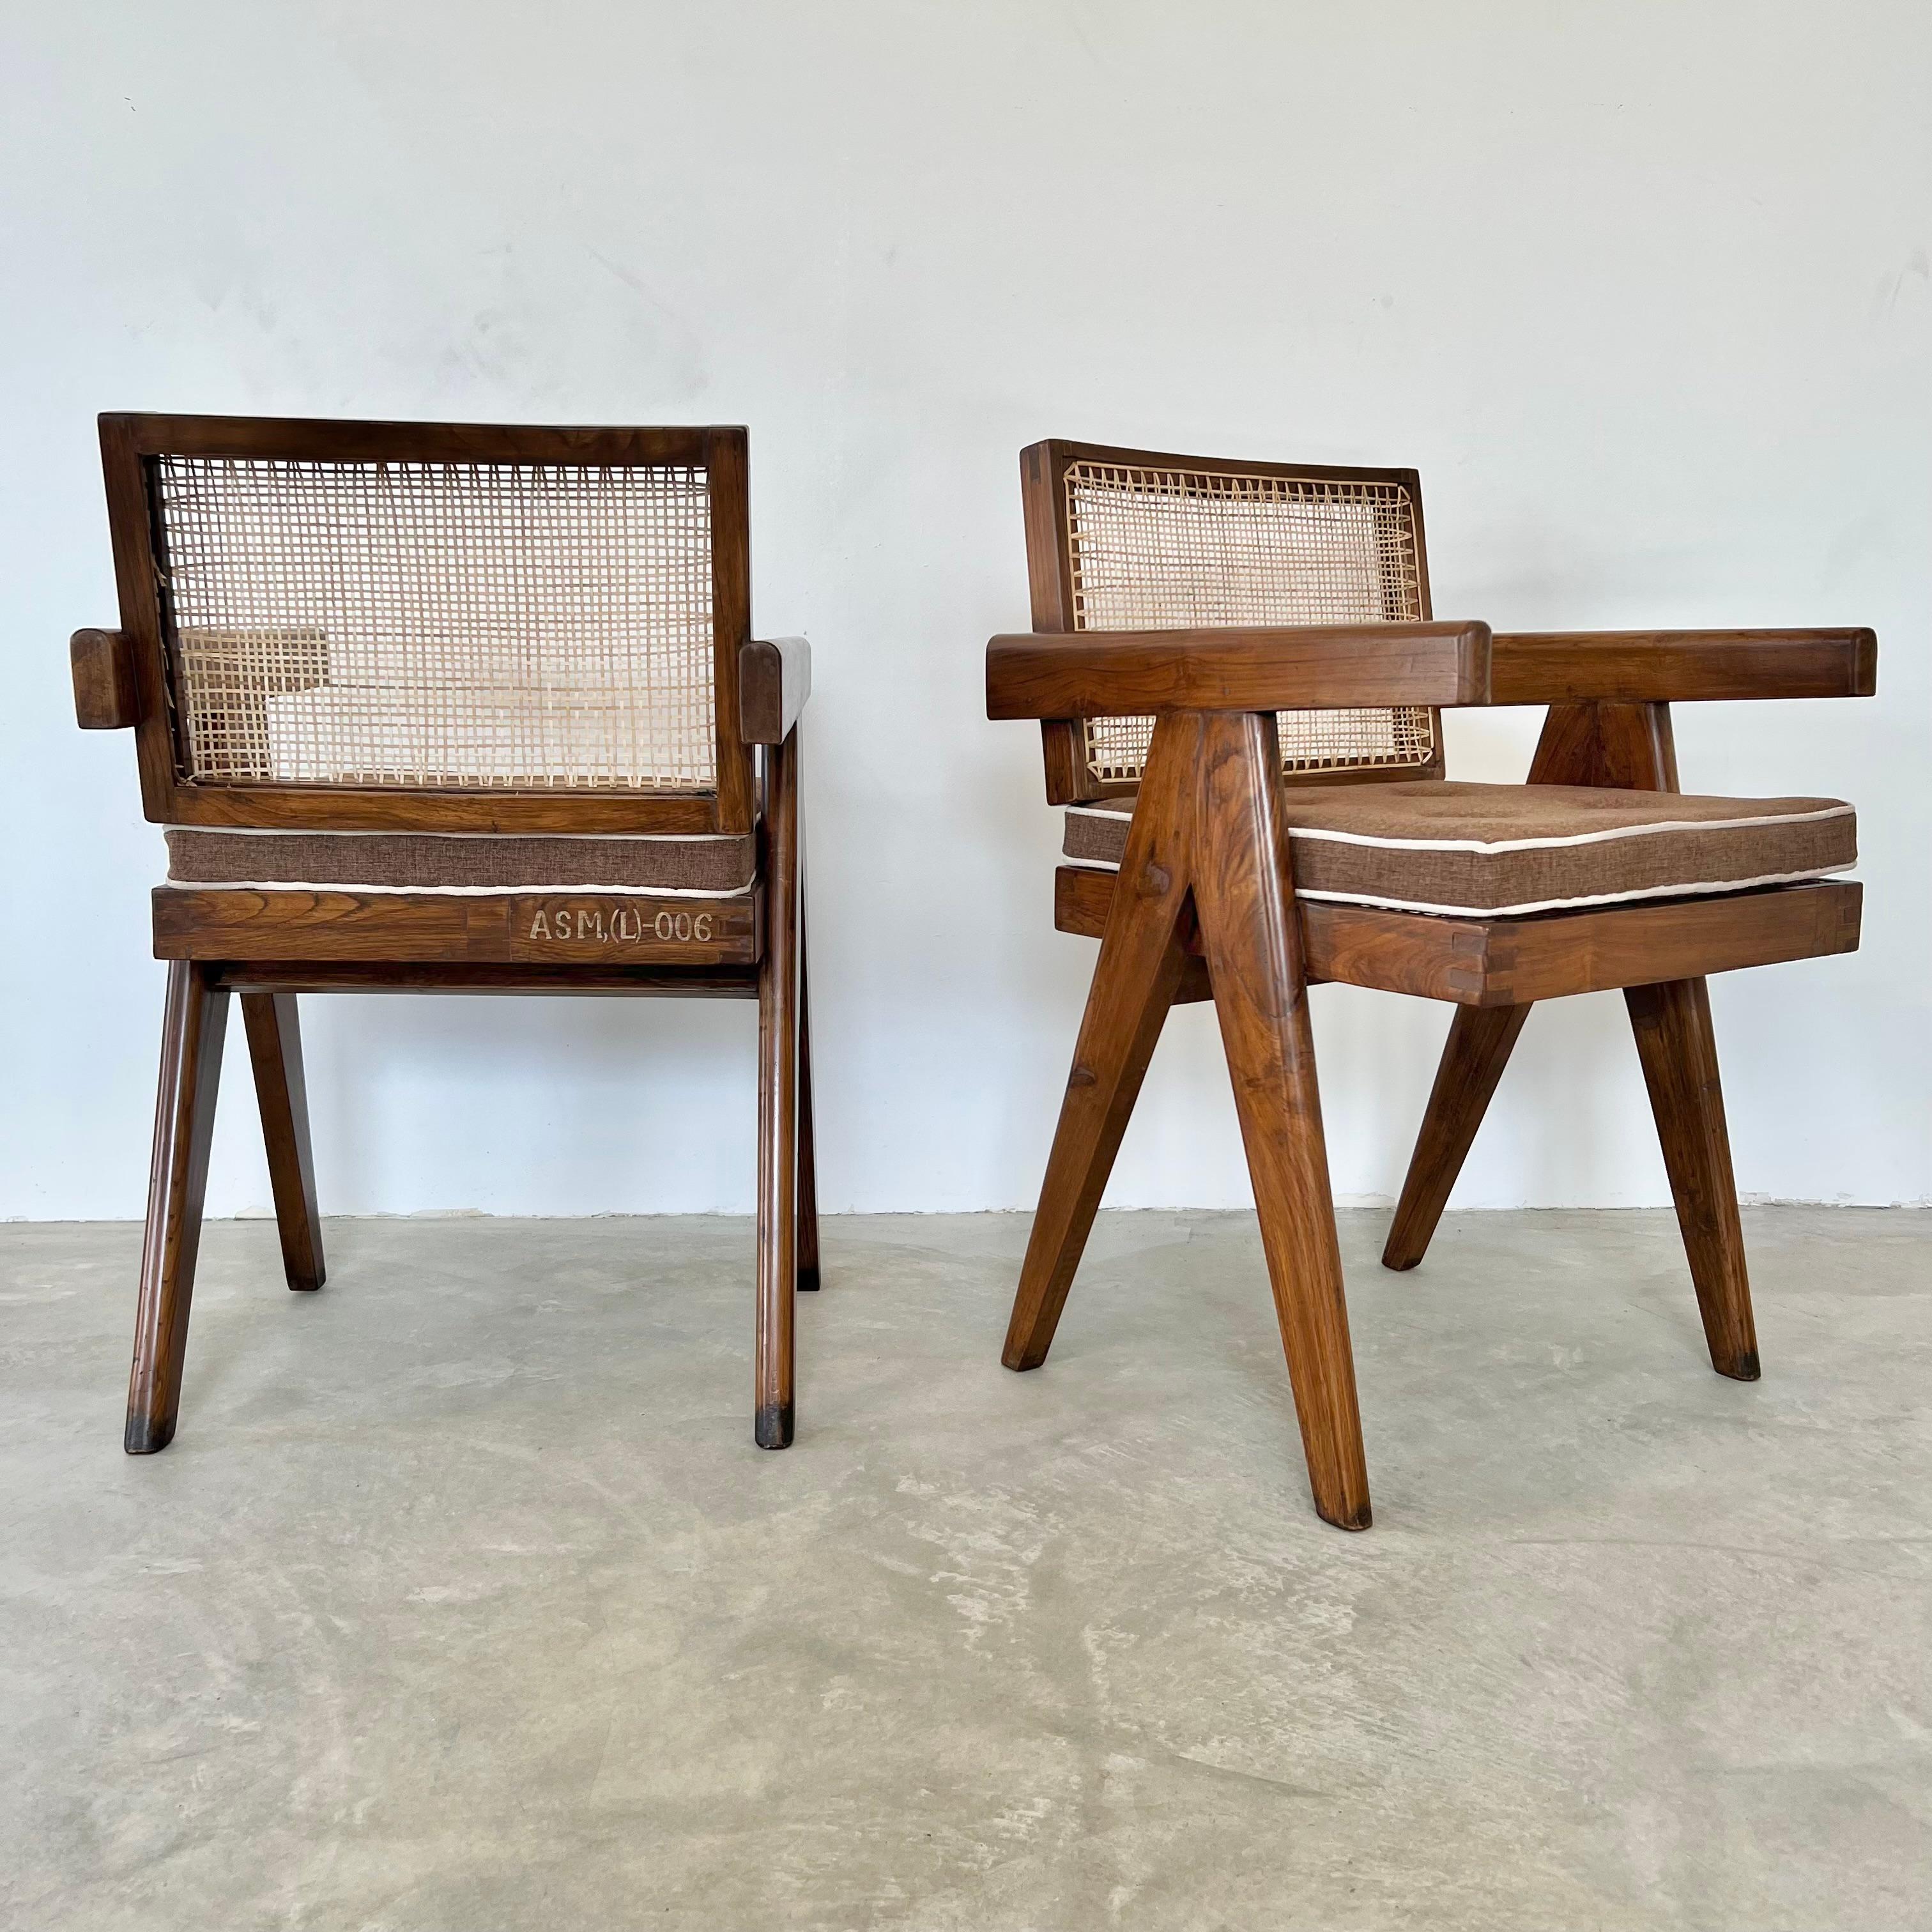 Mid-20th Century Pierre Jeanneret Office Chairs, 1950s Chandigargh For Sale